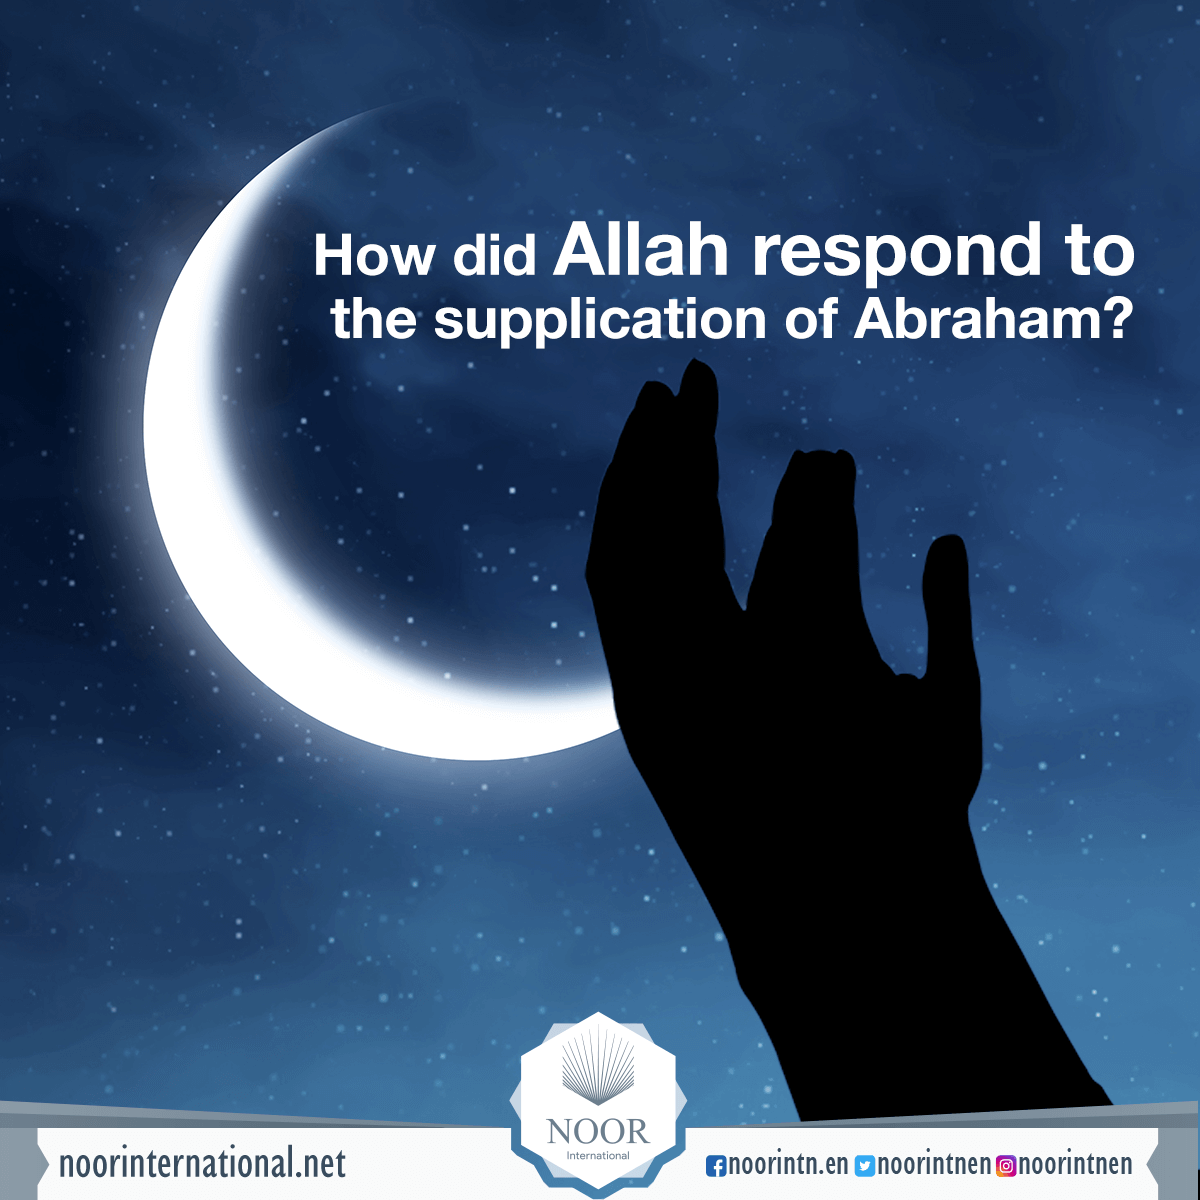 How did Allah respond to the supplication of Abraham?